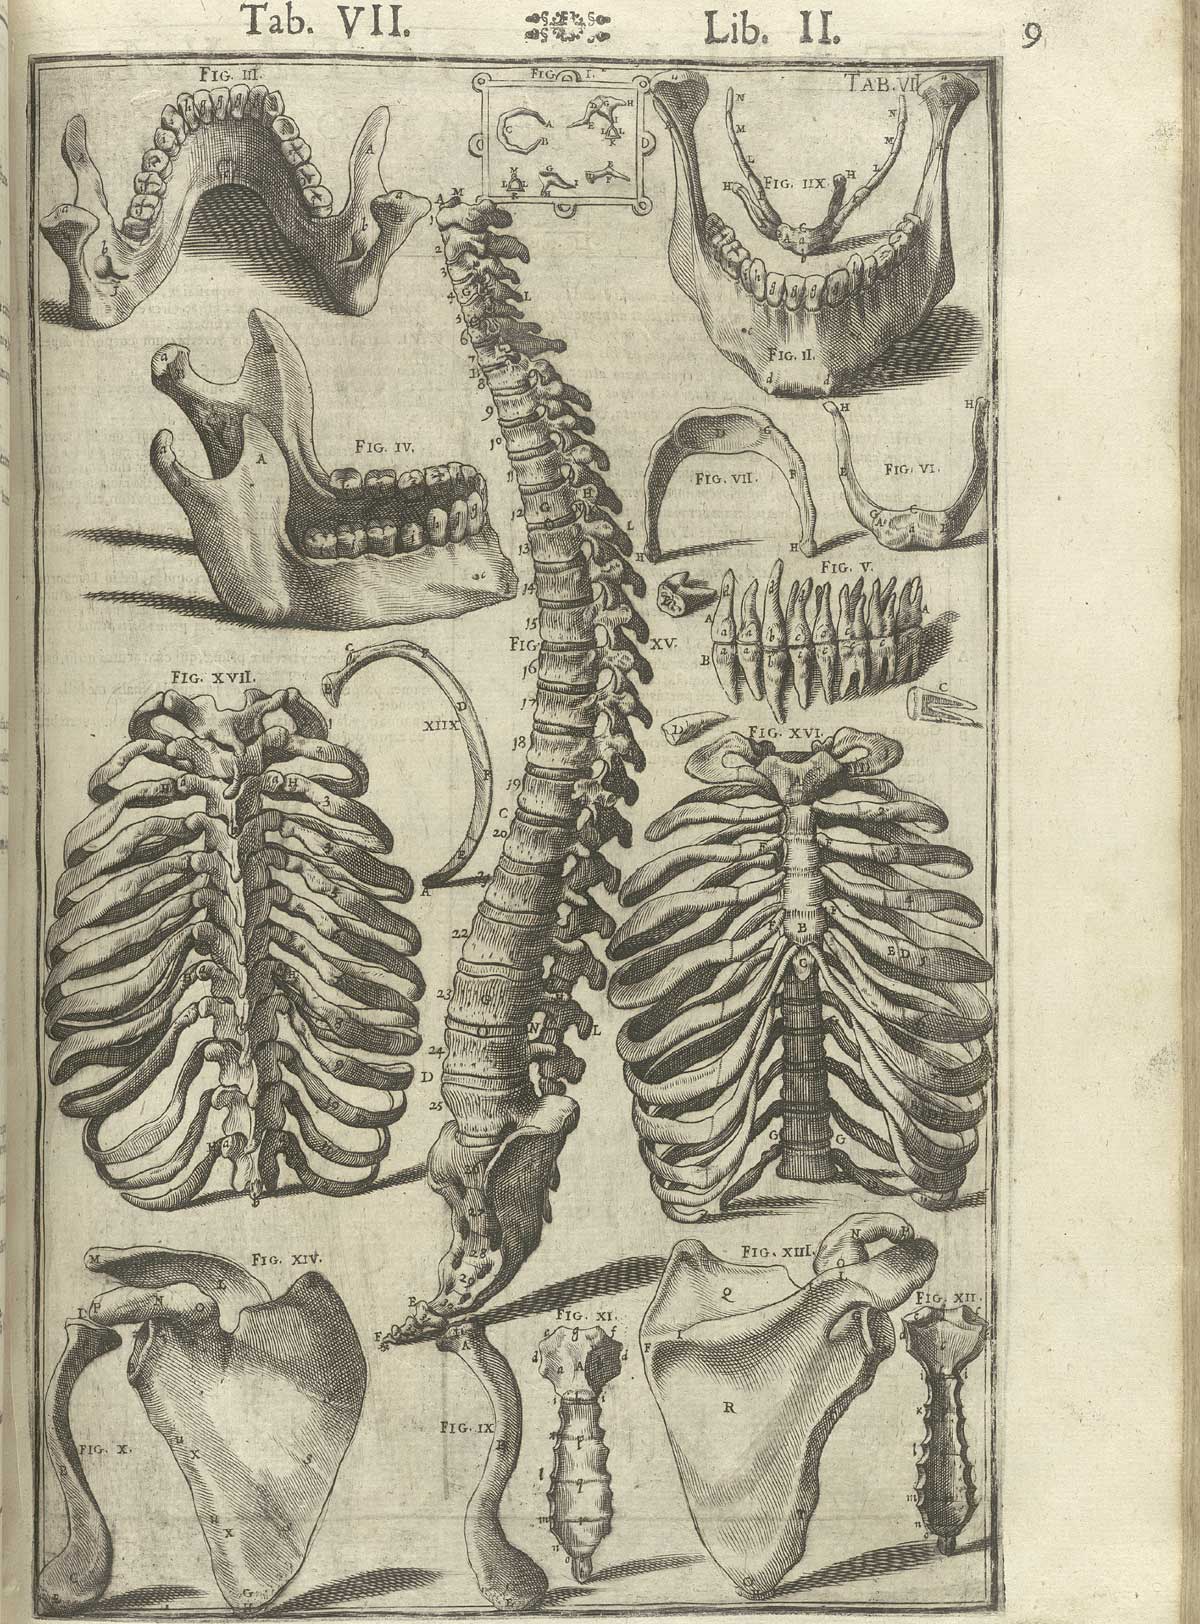 Engraving of various bones arranged compactly on the page, including a spinal column in the middle and the ribcage shown from the front and back on either side, three views of the mandible, the teeth, and the shoulder blade from two angles, from Adriaan van de Spiegel and Giulio Cassieri’s De humani corporis fabrica libri decem, Venice, 1627, NLM call no. WZ 250 S755dh 1627.